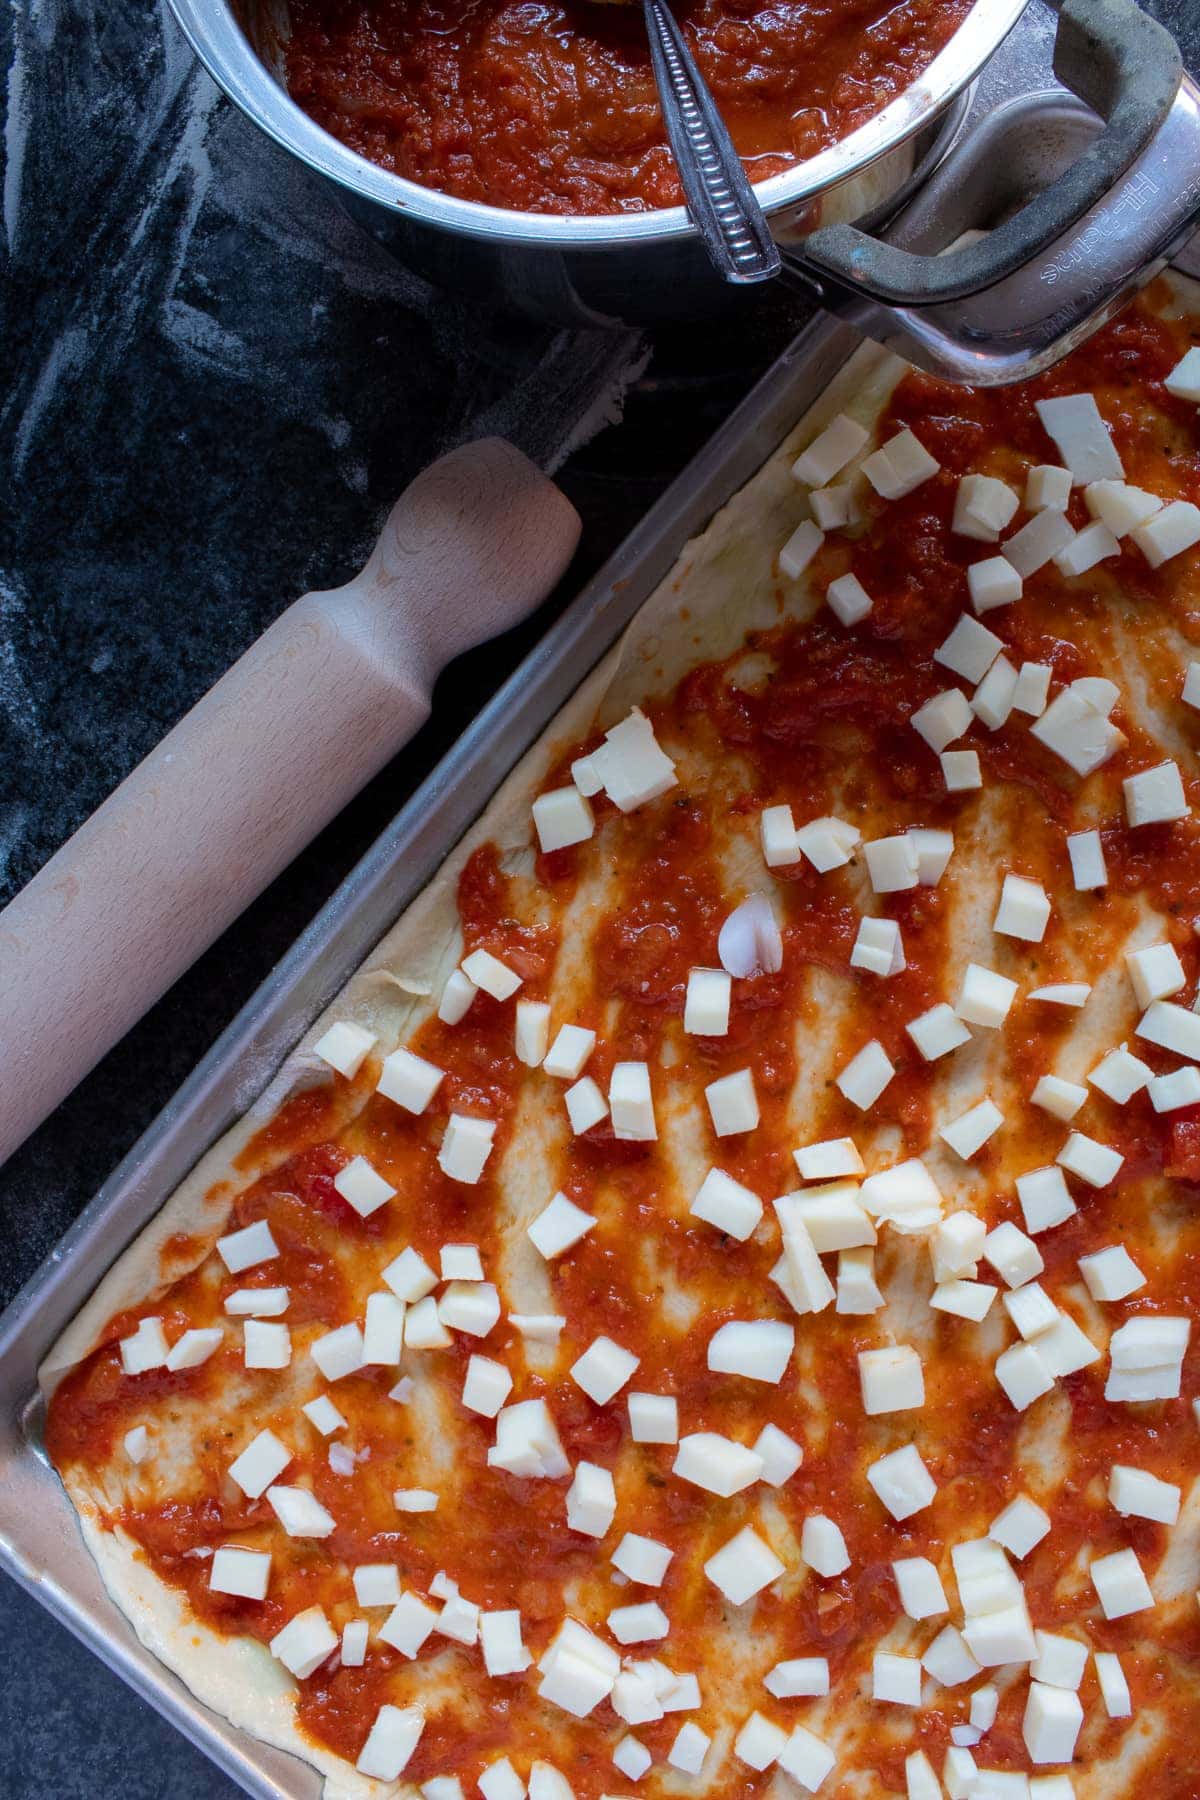 Pizza dough unbaked topped with tomato sauce and diced mozzarella